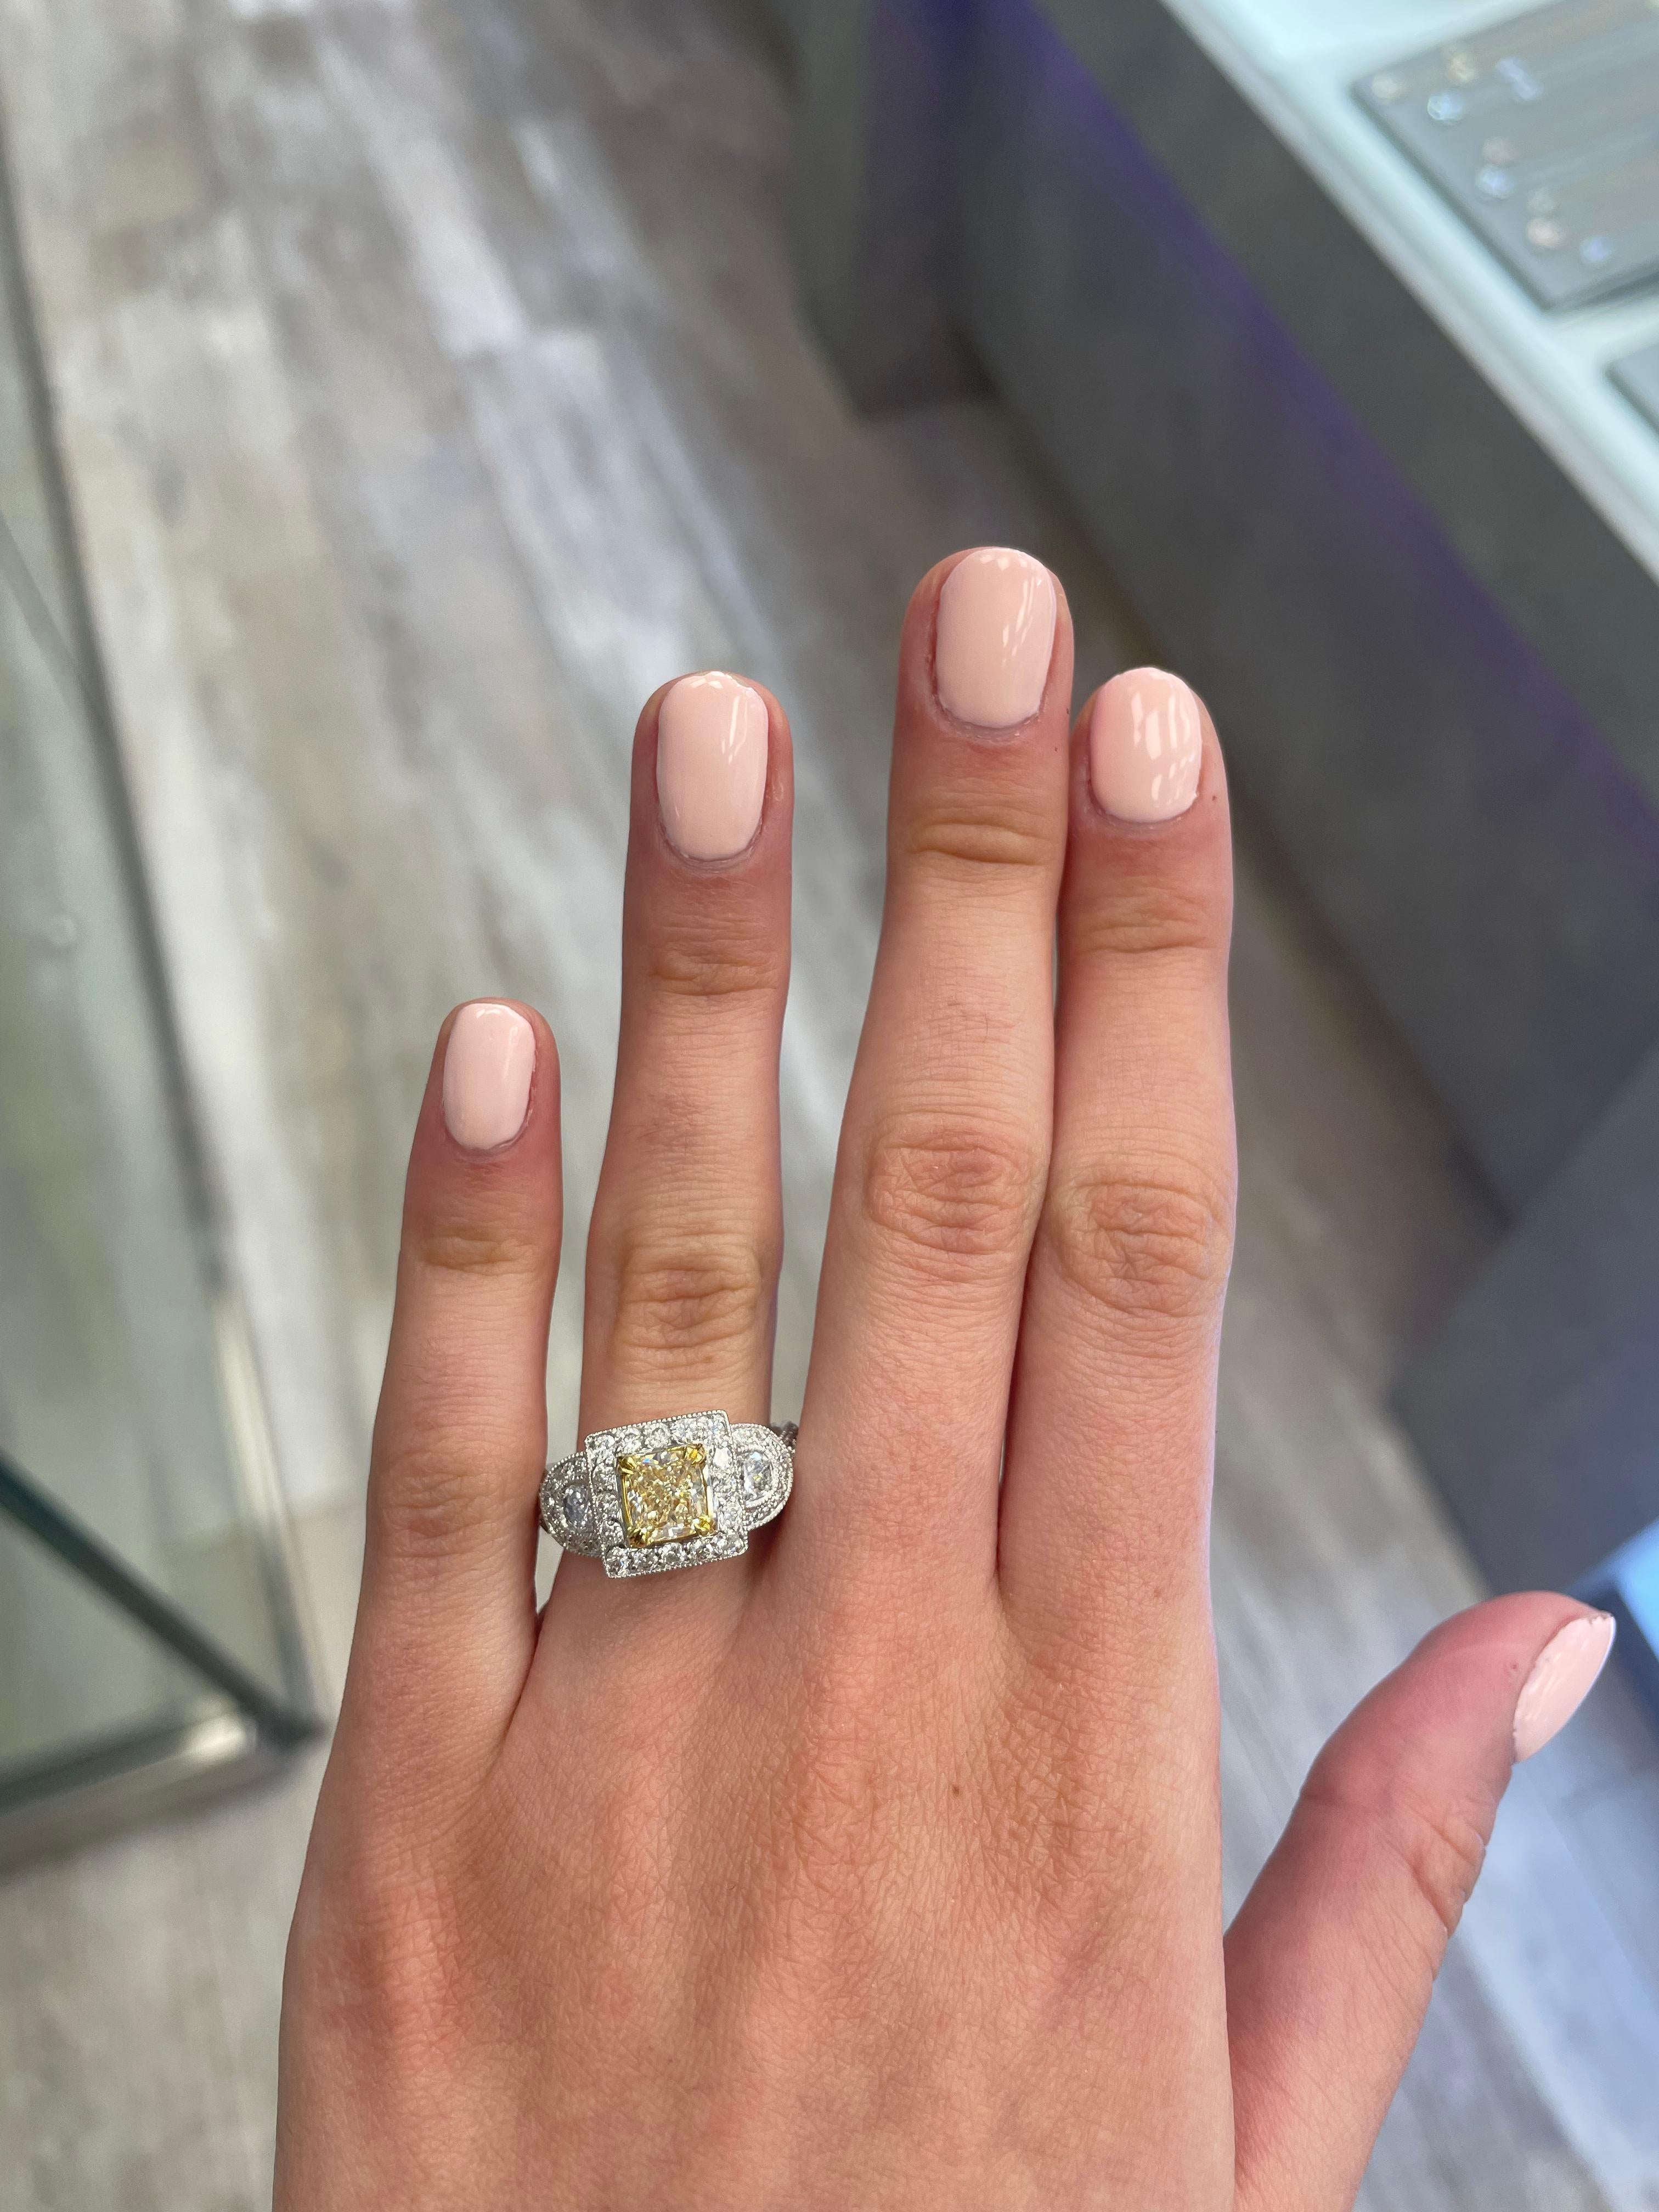 Stunning modern EGL certified yellow diamond with halo ring, two-tone 18k yellow and white gold, split shank. By Alexander Beverly Hills
2.63 carats total diamond weight.
1.13 carat cushion cut Fancy Yellow color and VVS2 clarity diamond, EGL